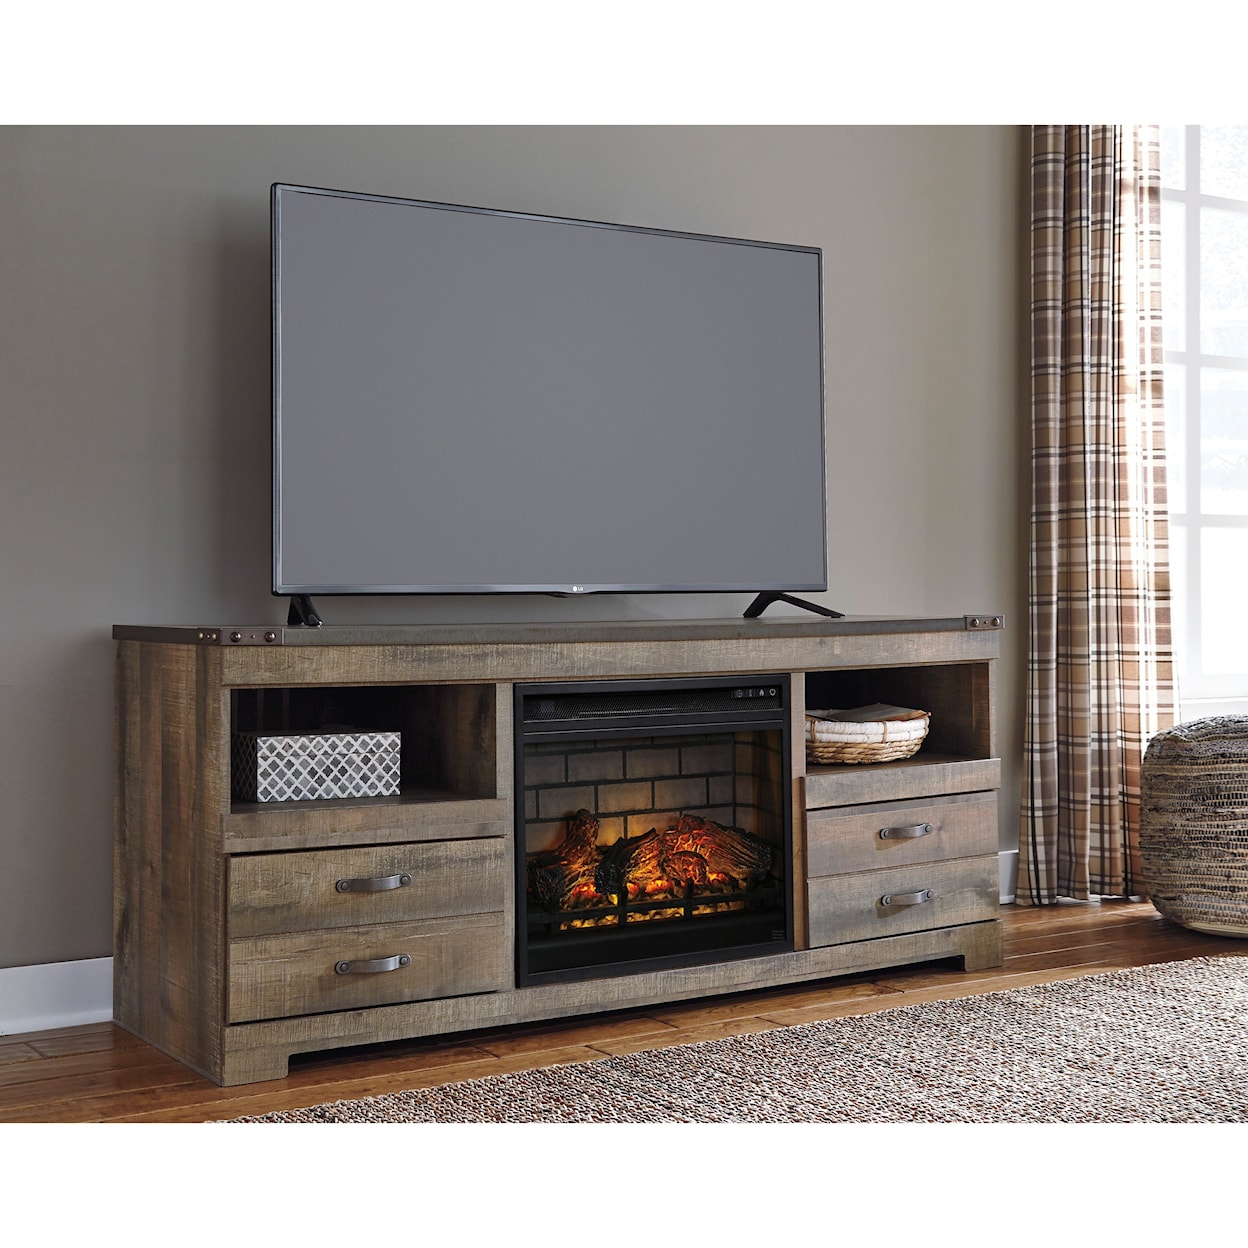 StyleLine KENNY Large TV Stand with Fireplace Insert